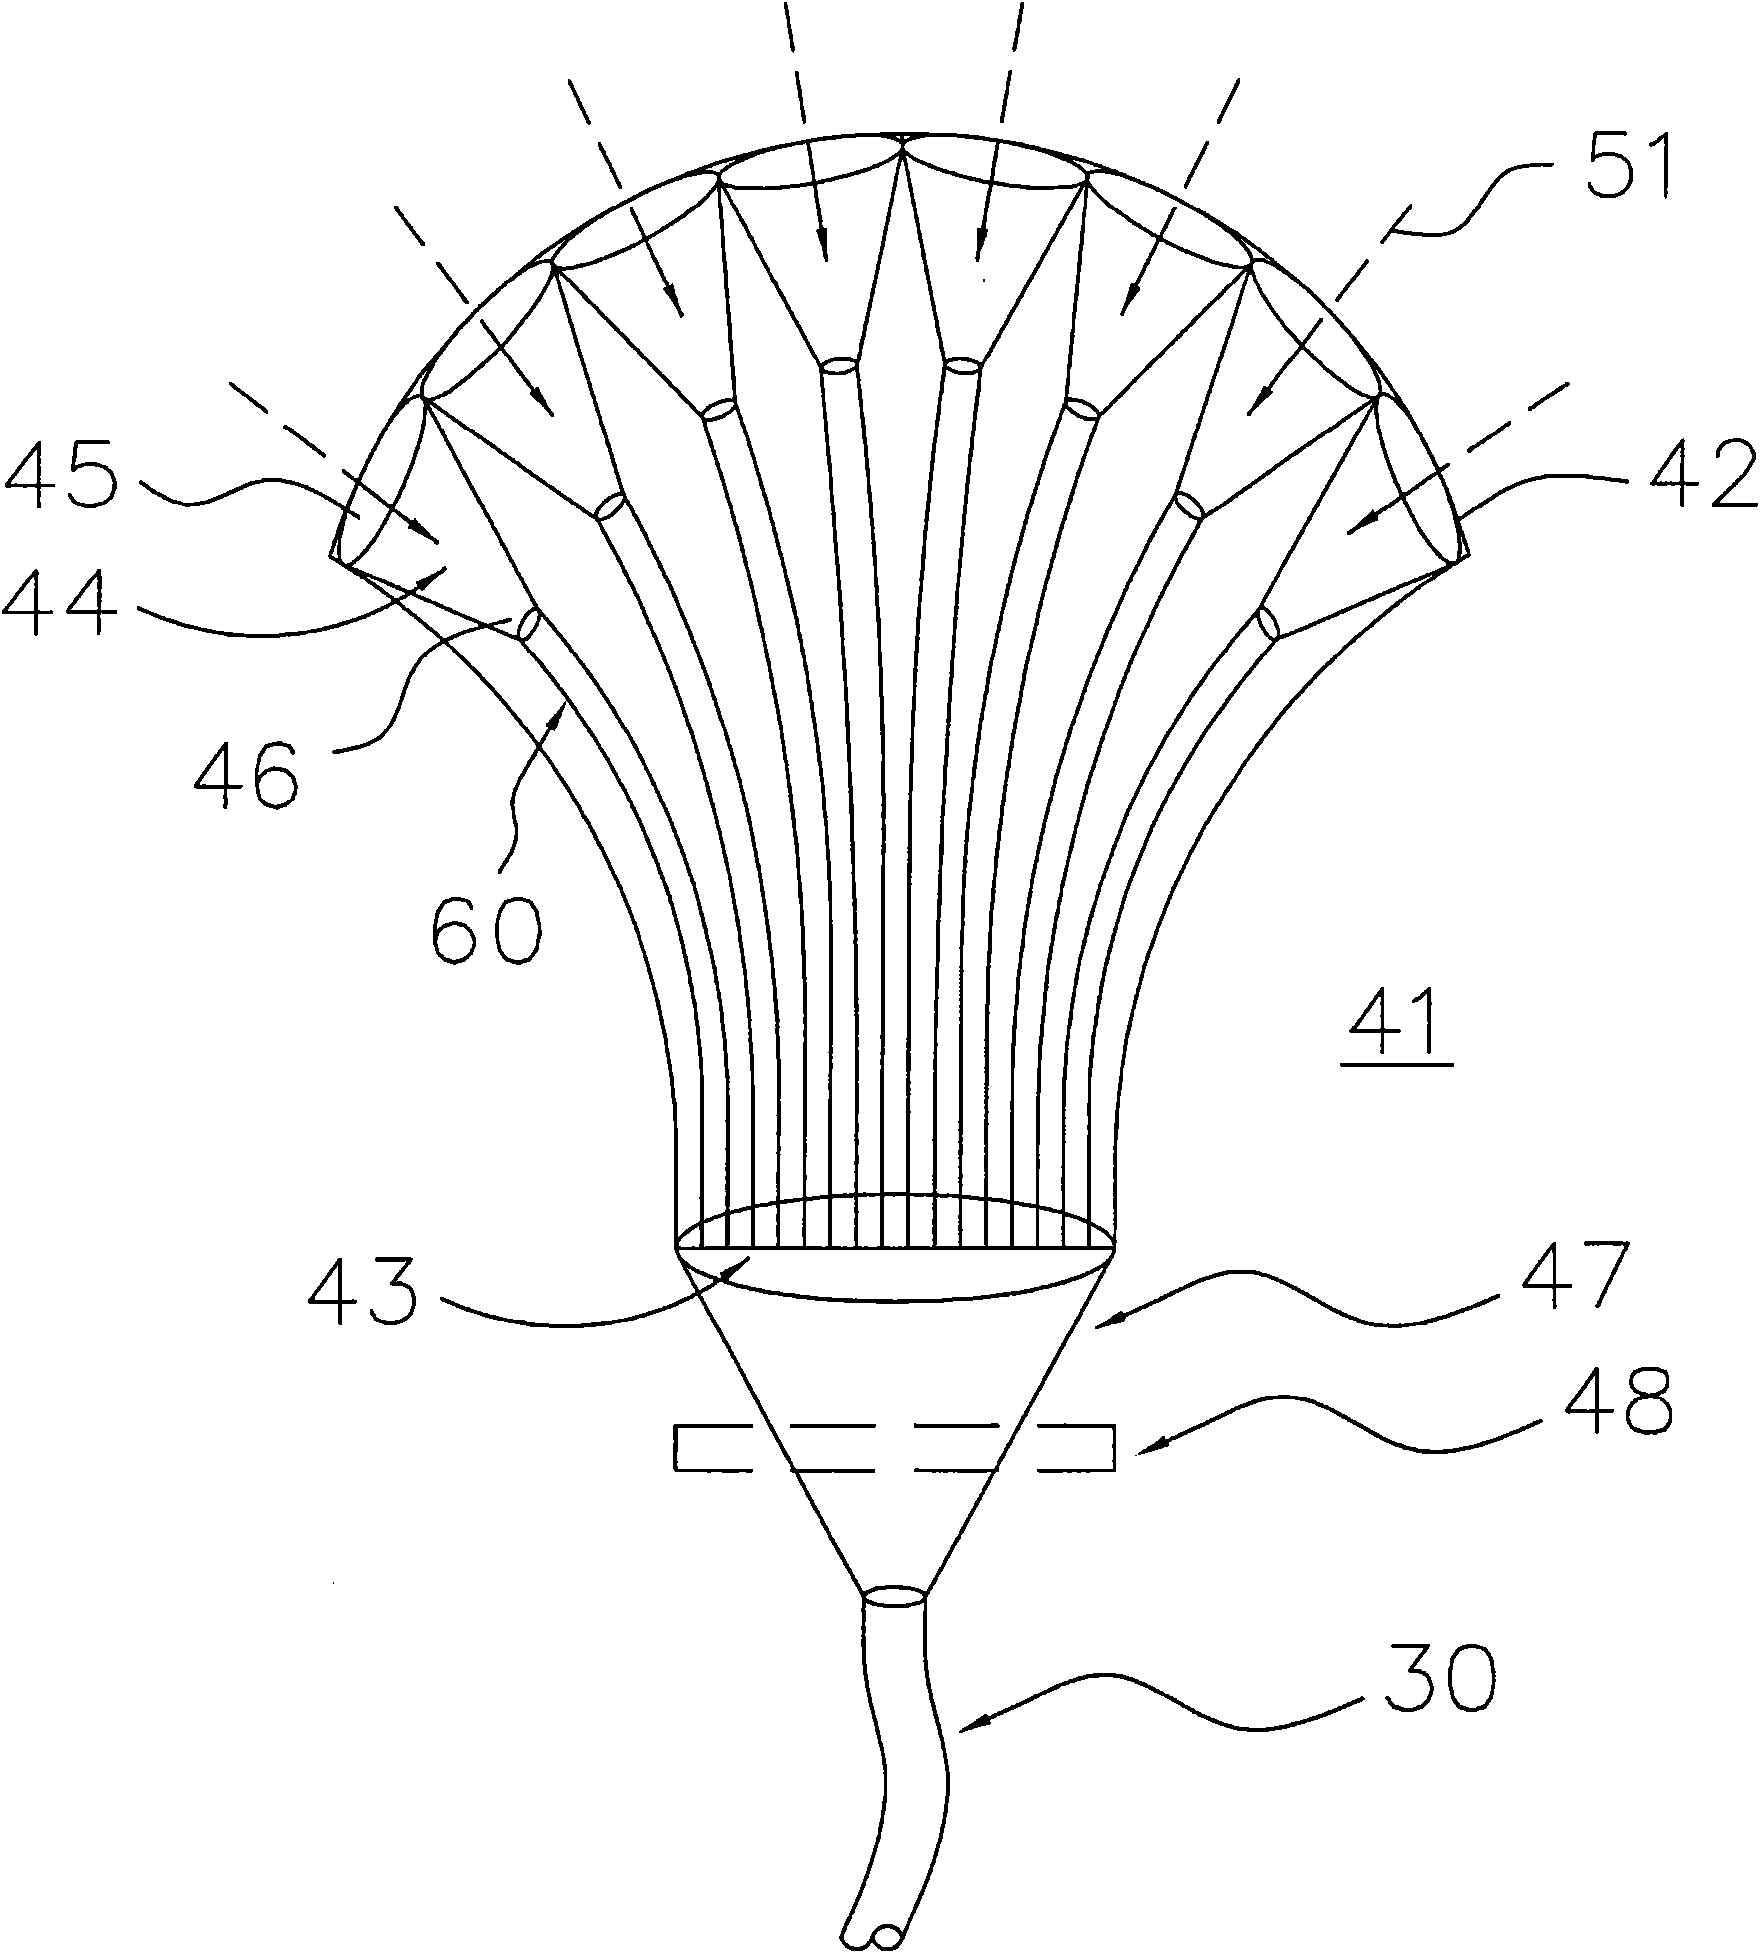 Sunlight collecting device